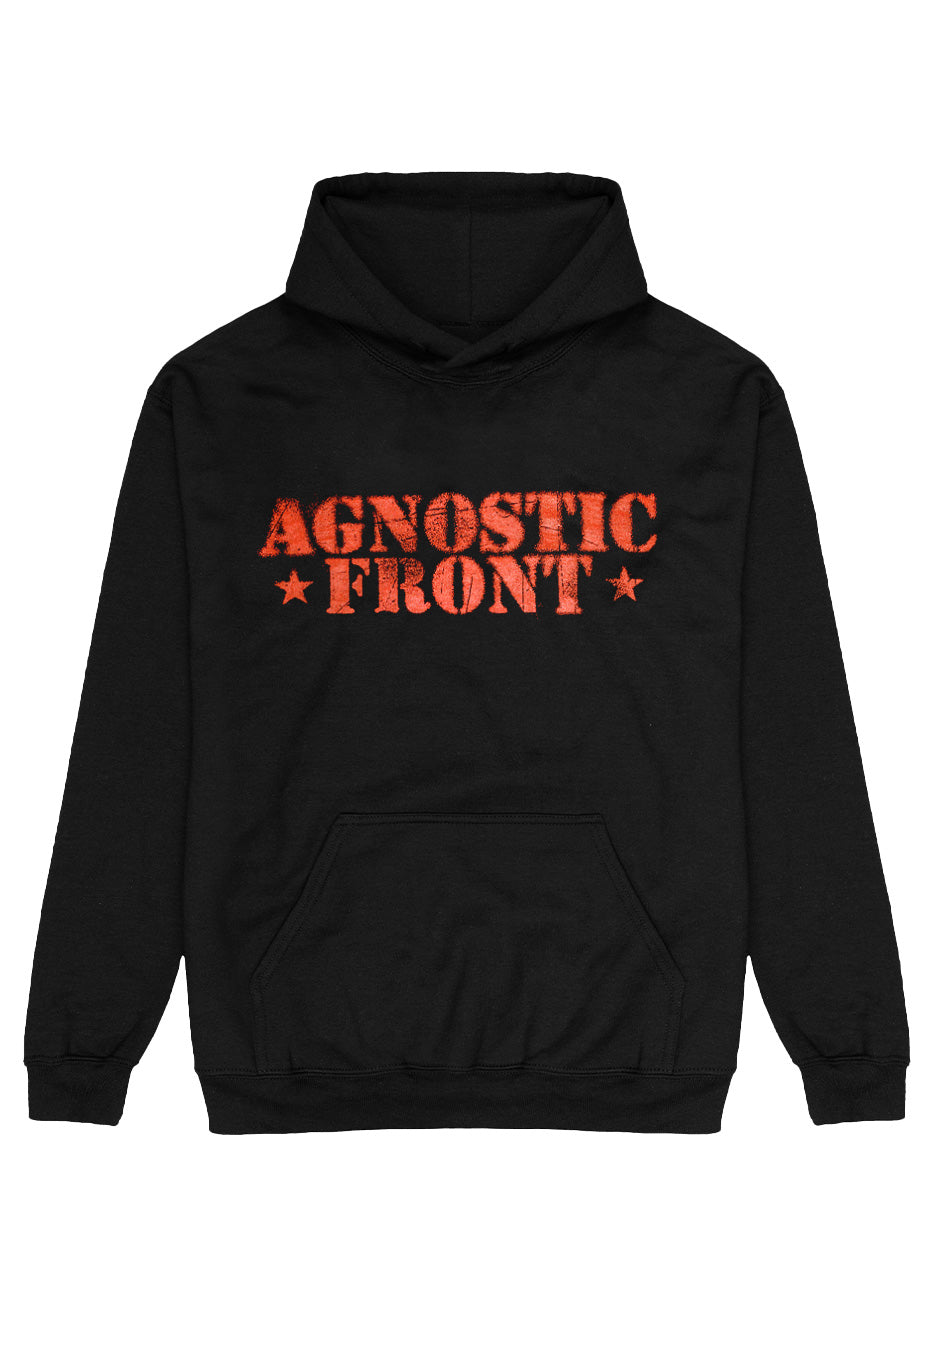 Agnostic Front - United And Strong - Hoodie